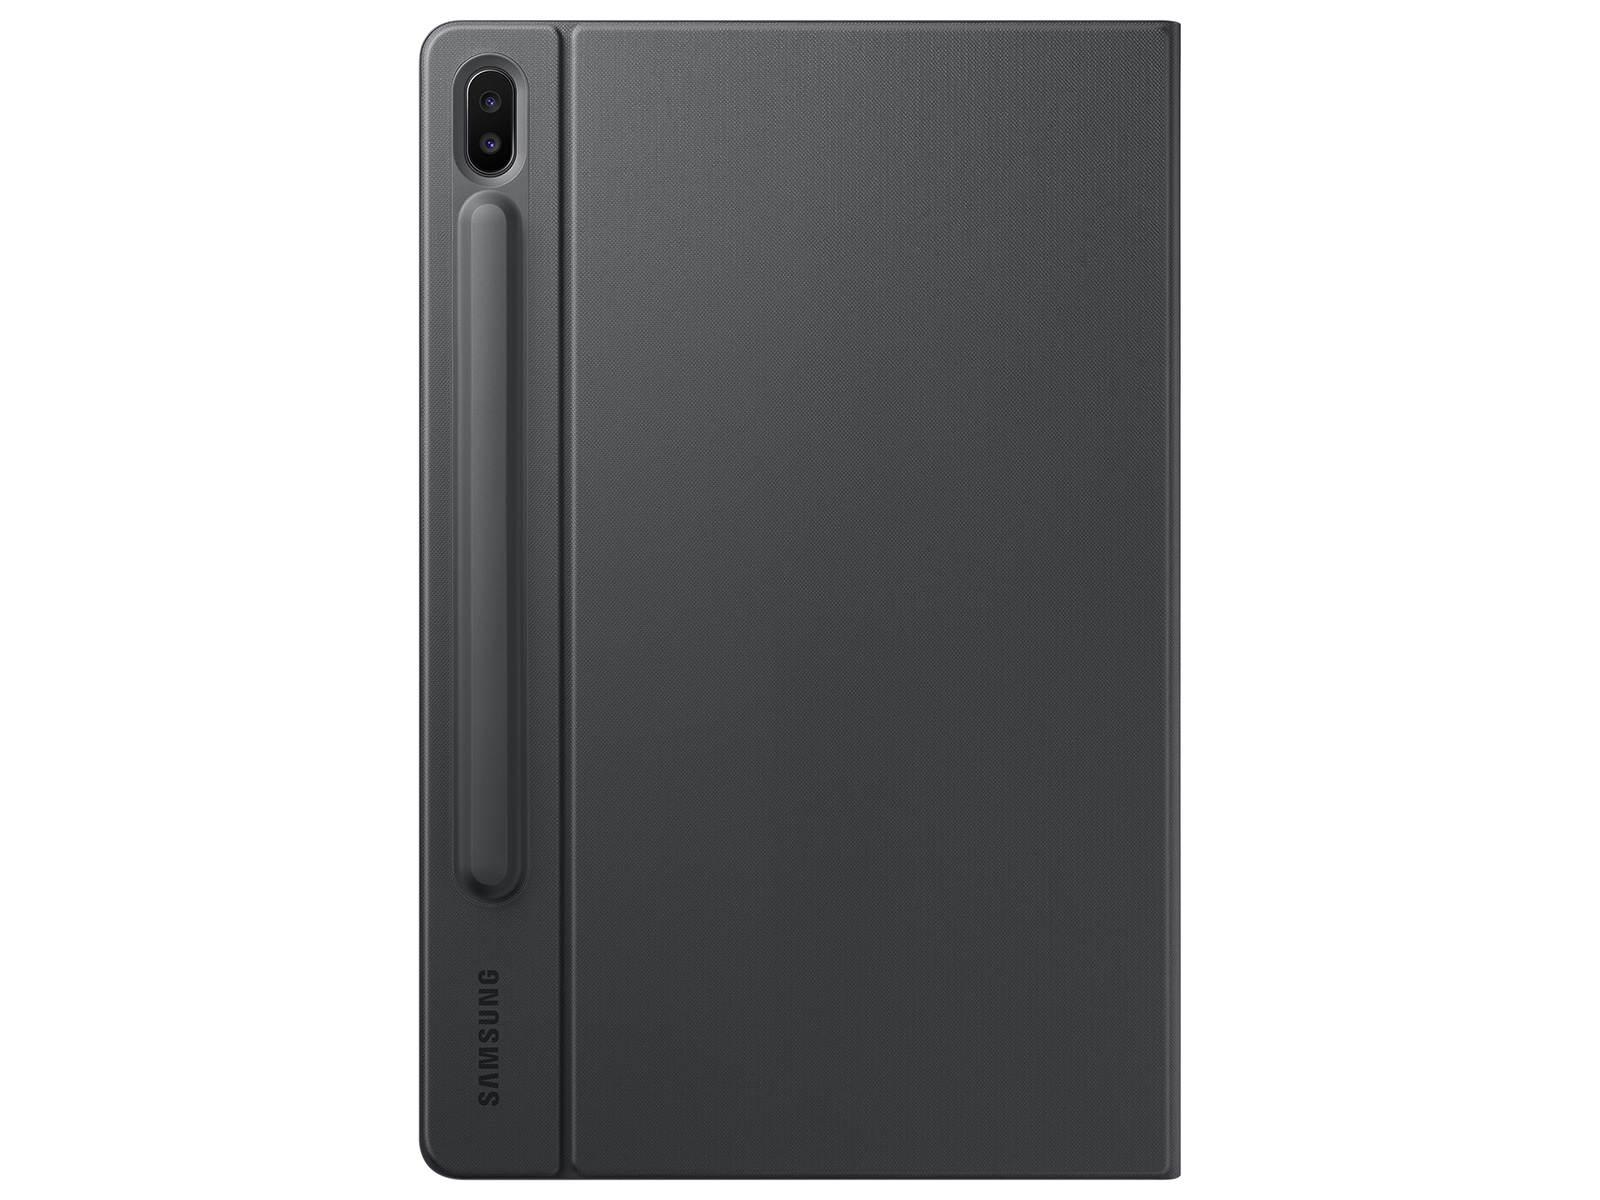 Thumbnail image of Galaxy Tab S6 Book Cover - Mountain Gray